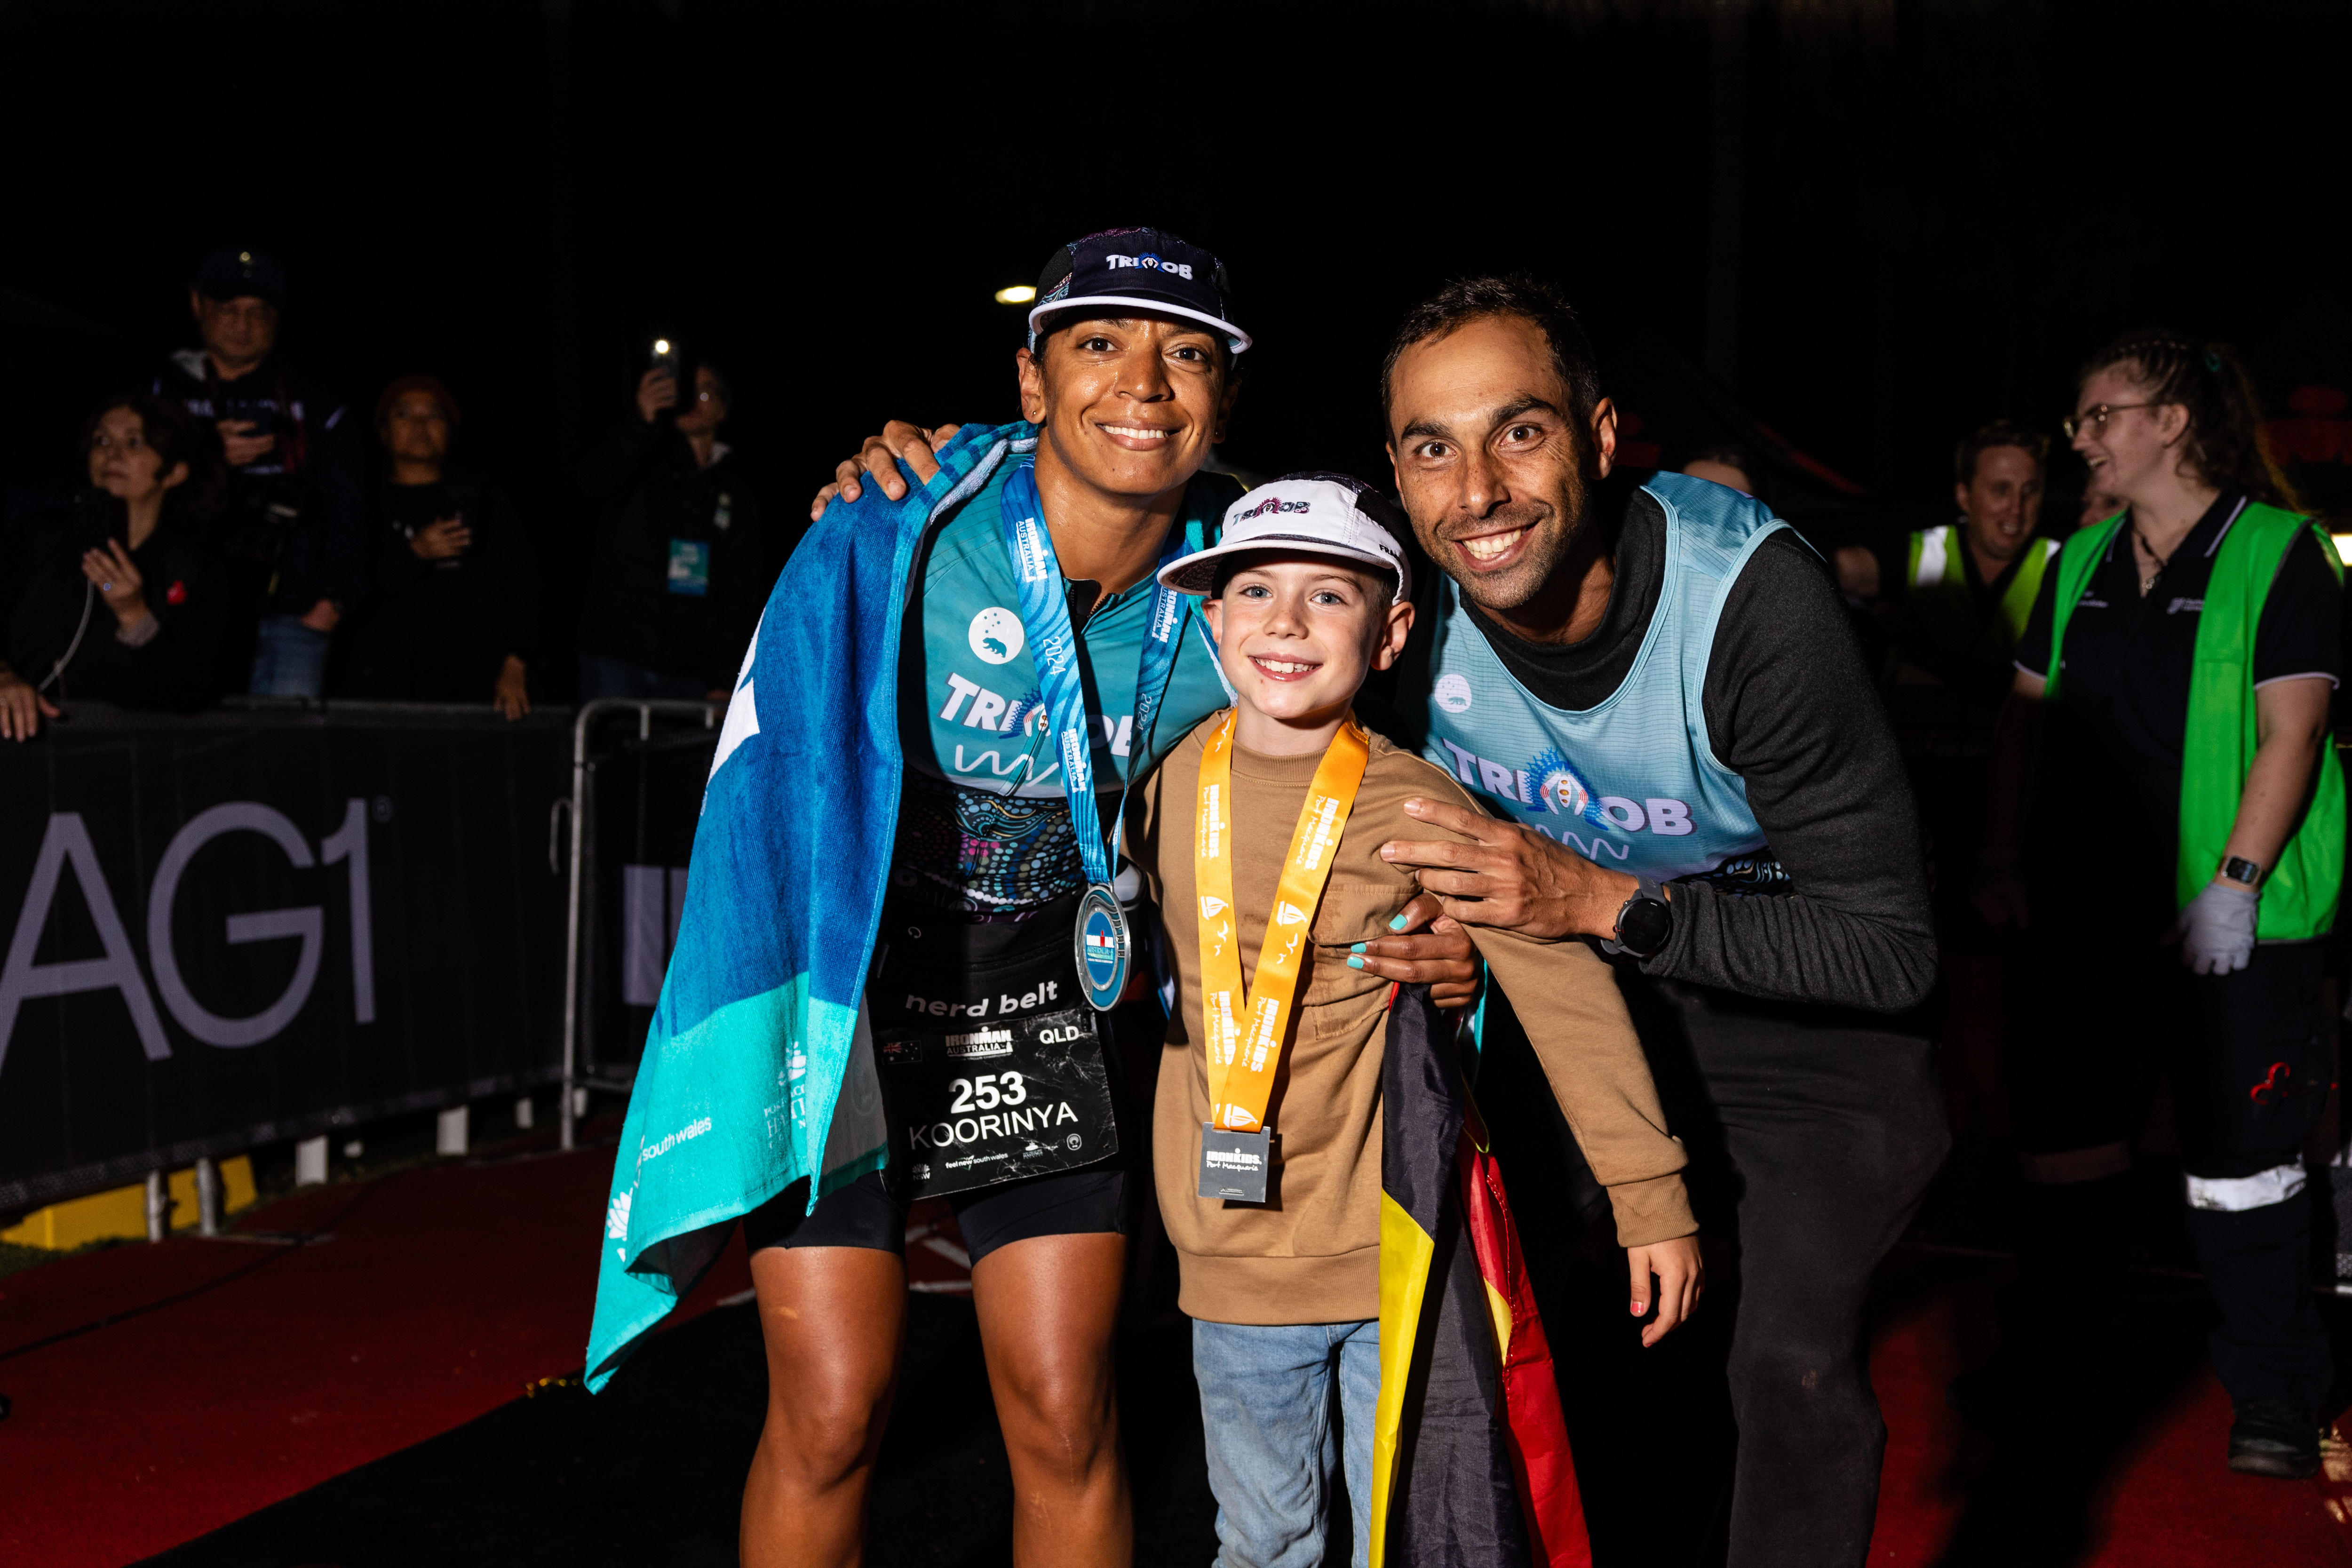 Two Indigenous athletes wearing medals and a small boy hug one another at the finish line of a triathlon.